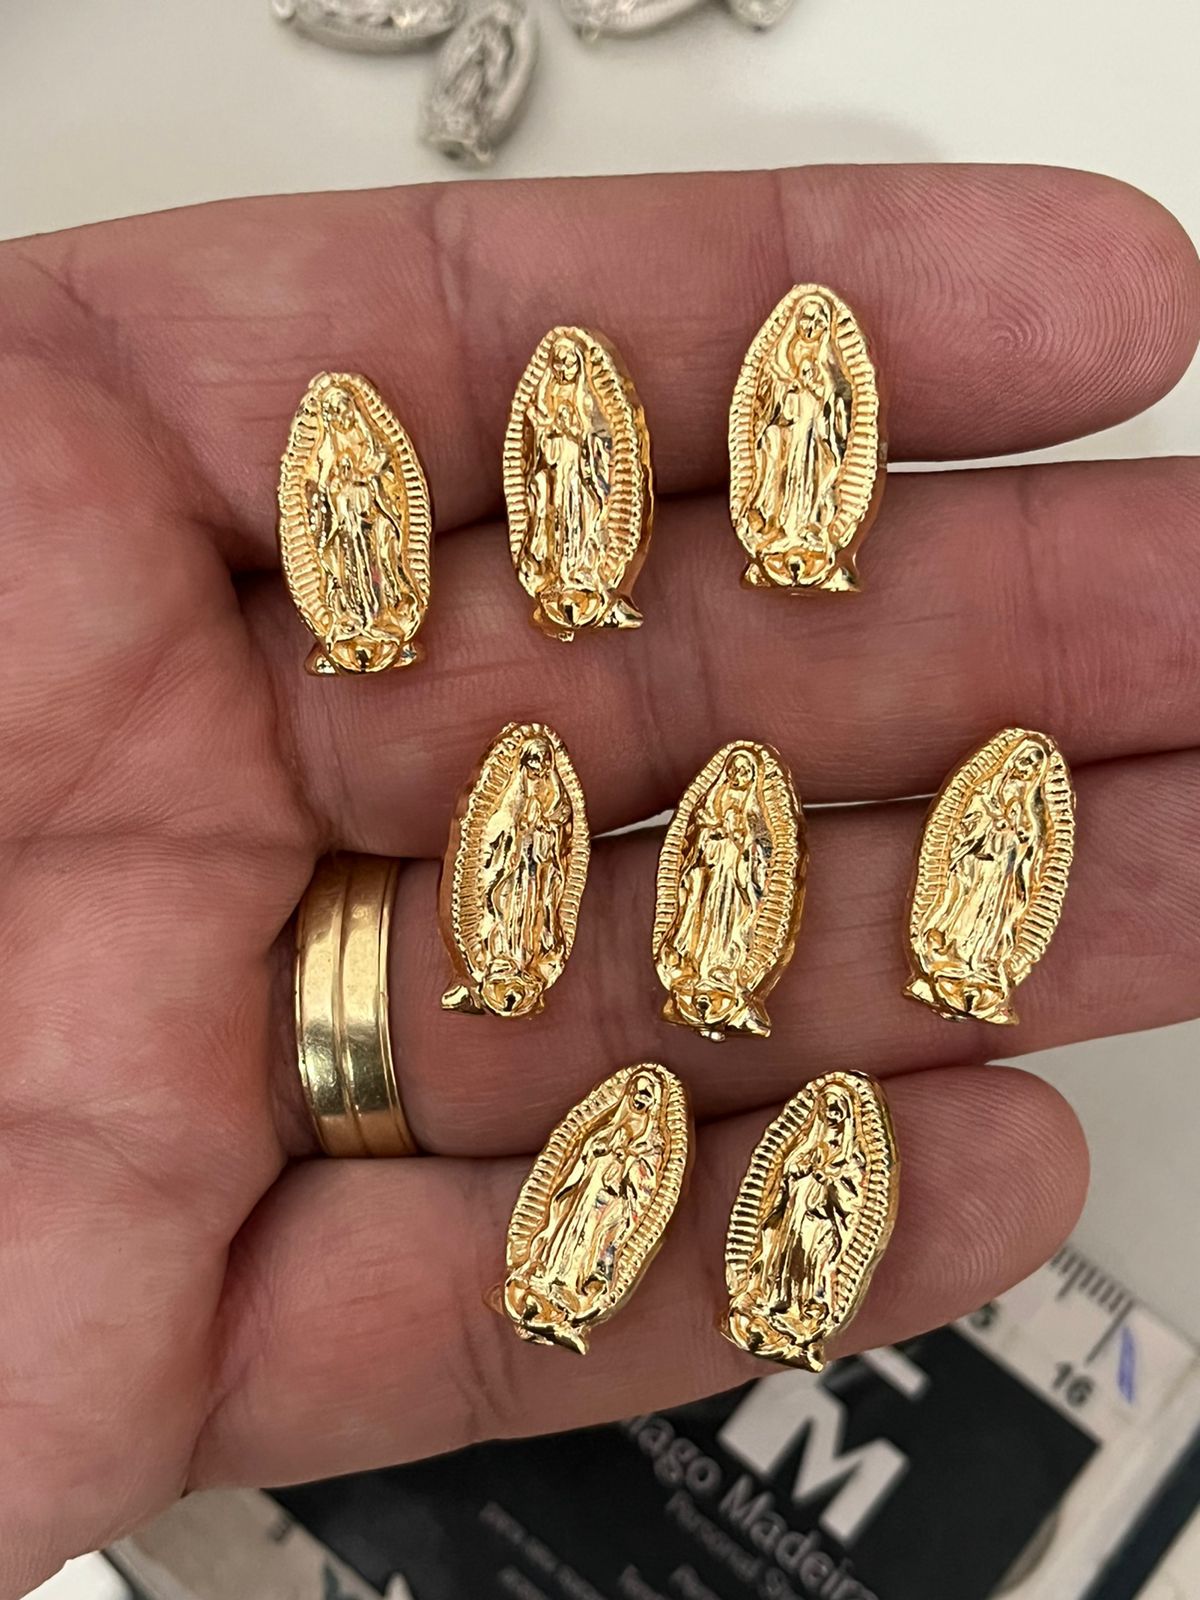 Which finger should Hindu girls wear gold rings on? - Quora